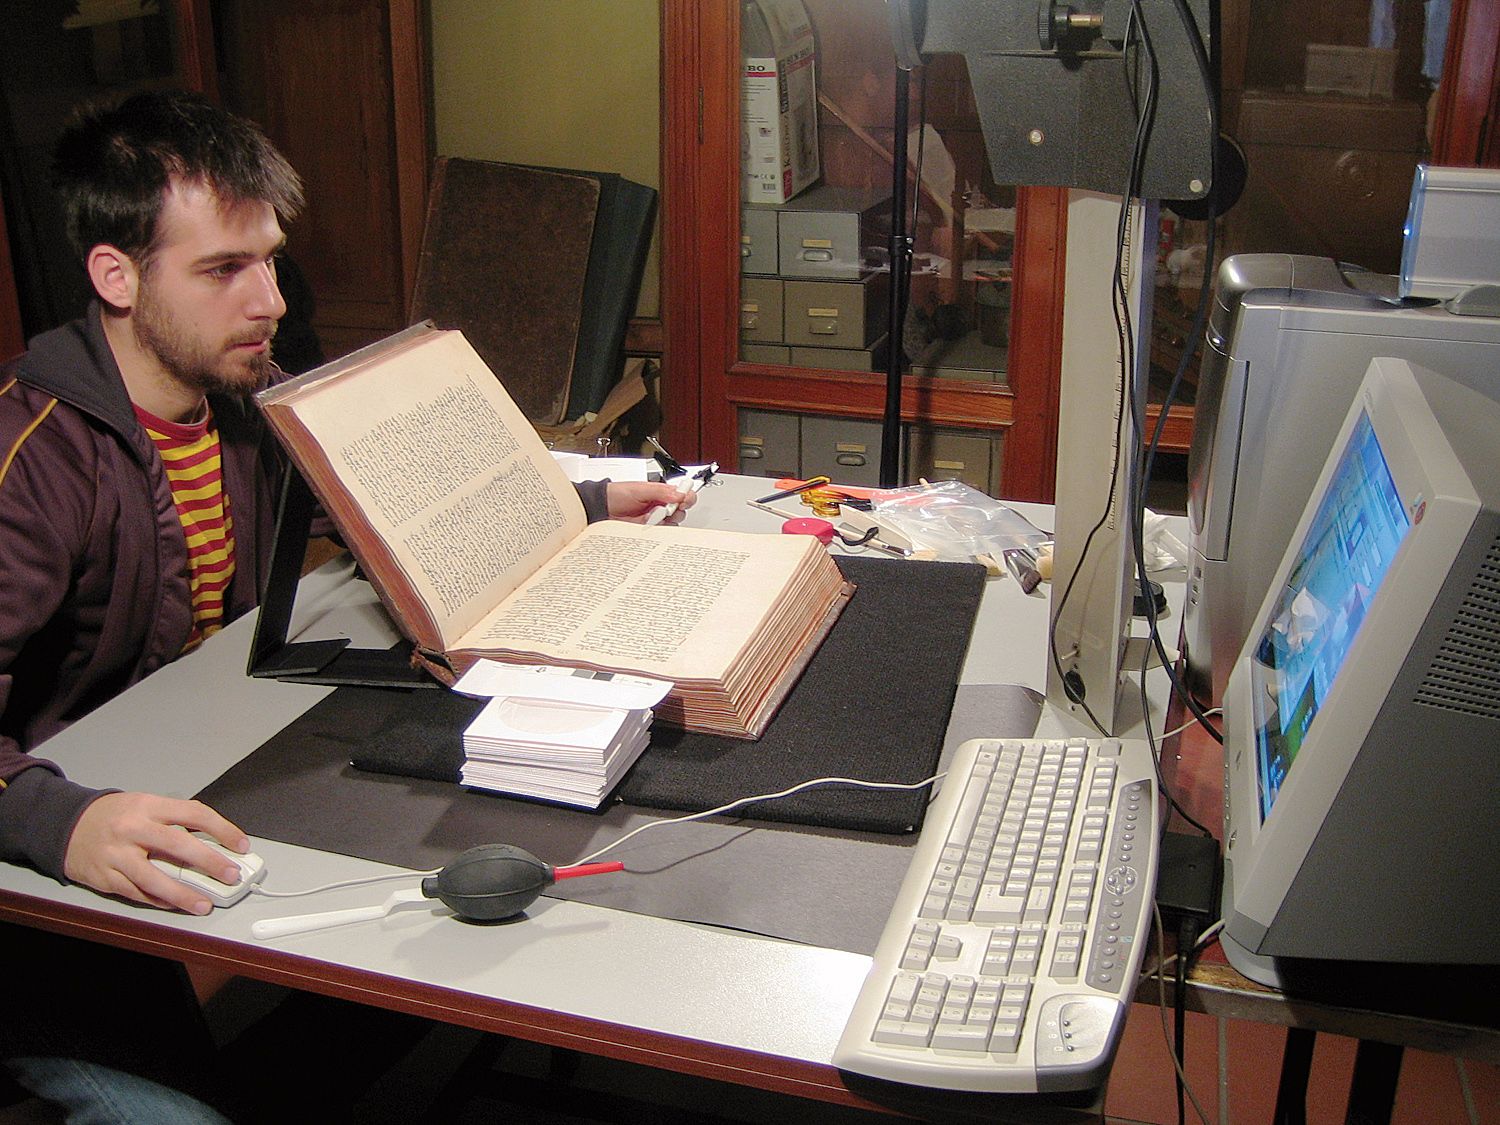 Digitization at the Armenian Patriarchate in Istanbul